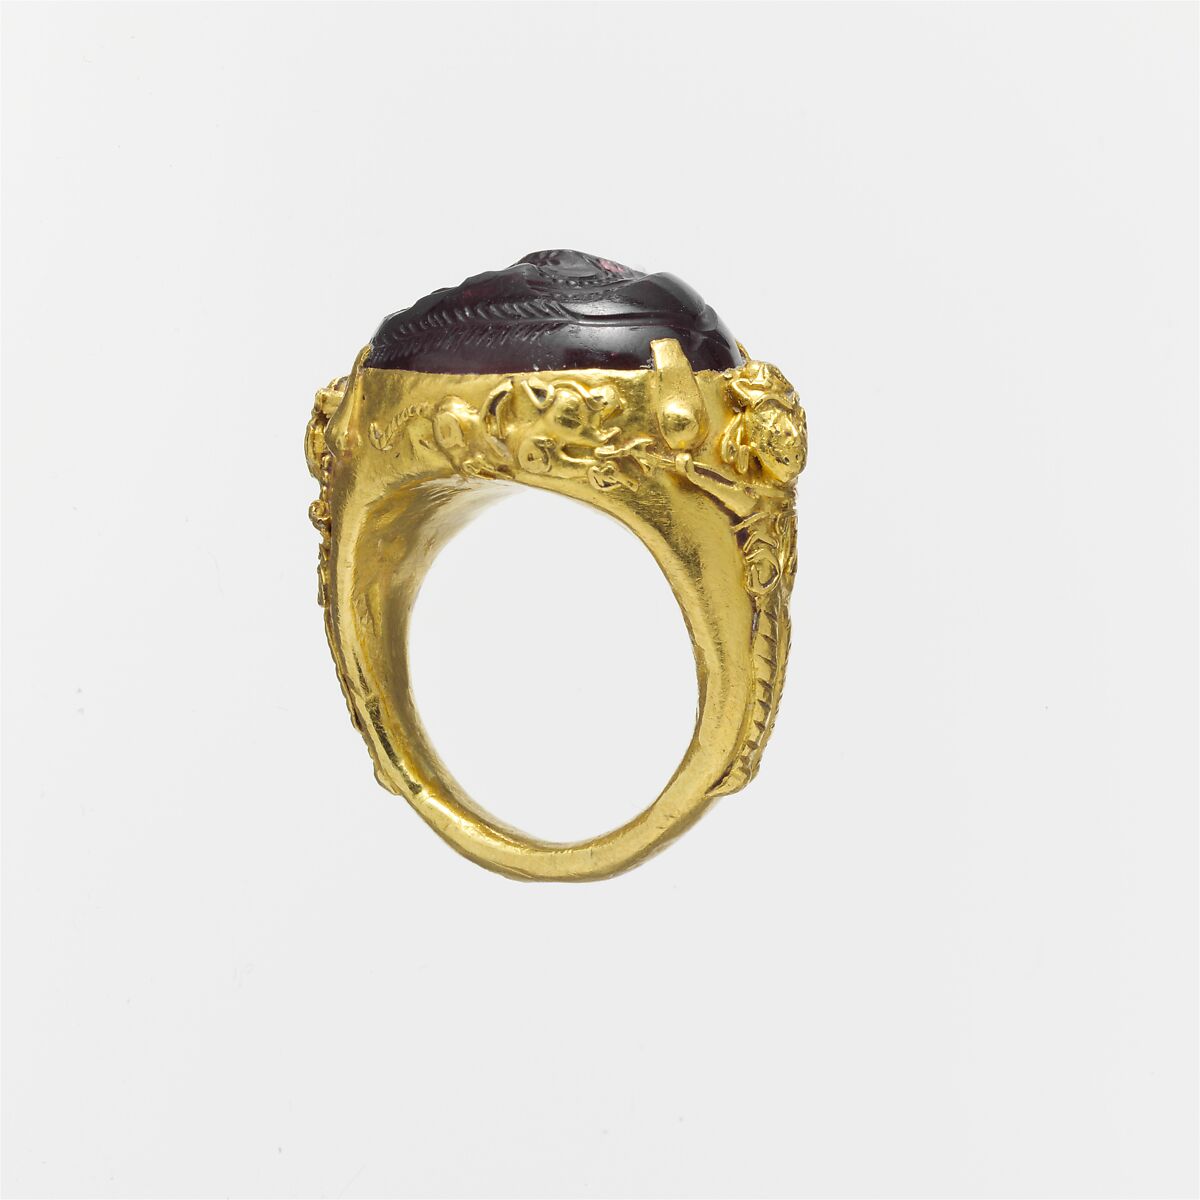 Gold ring with a carnelian or glass intaglio, Gold, Roman 